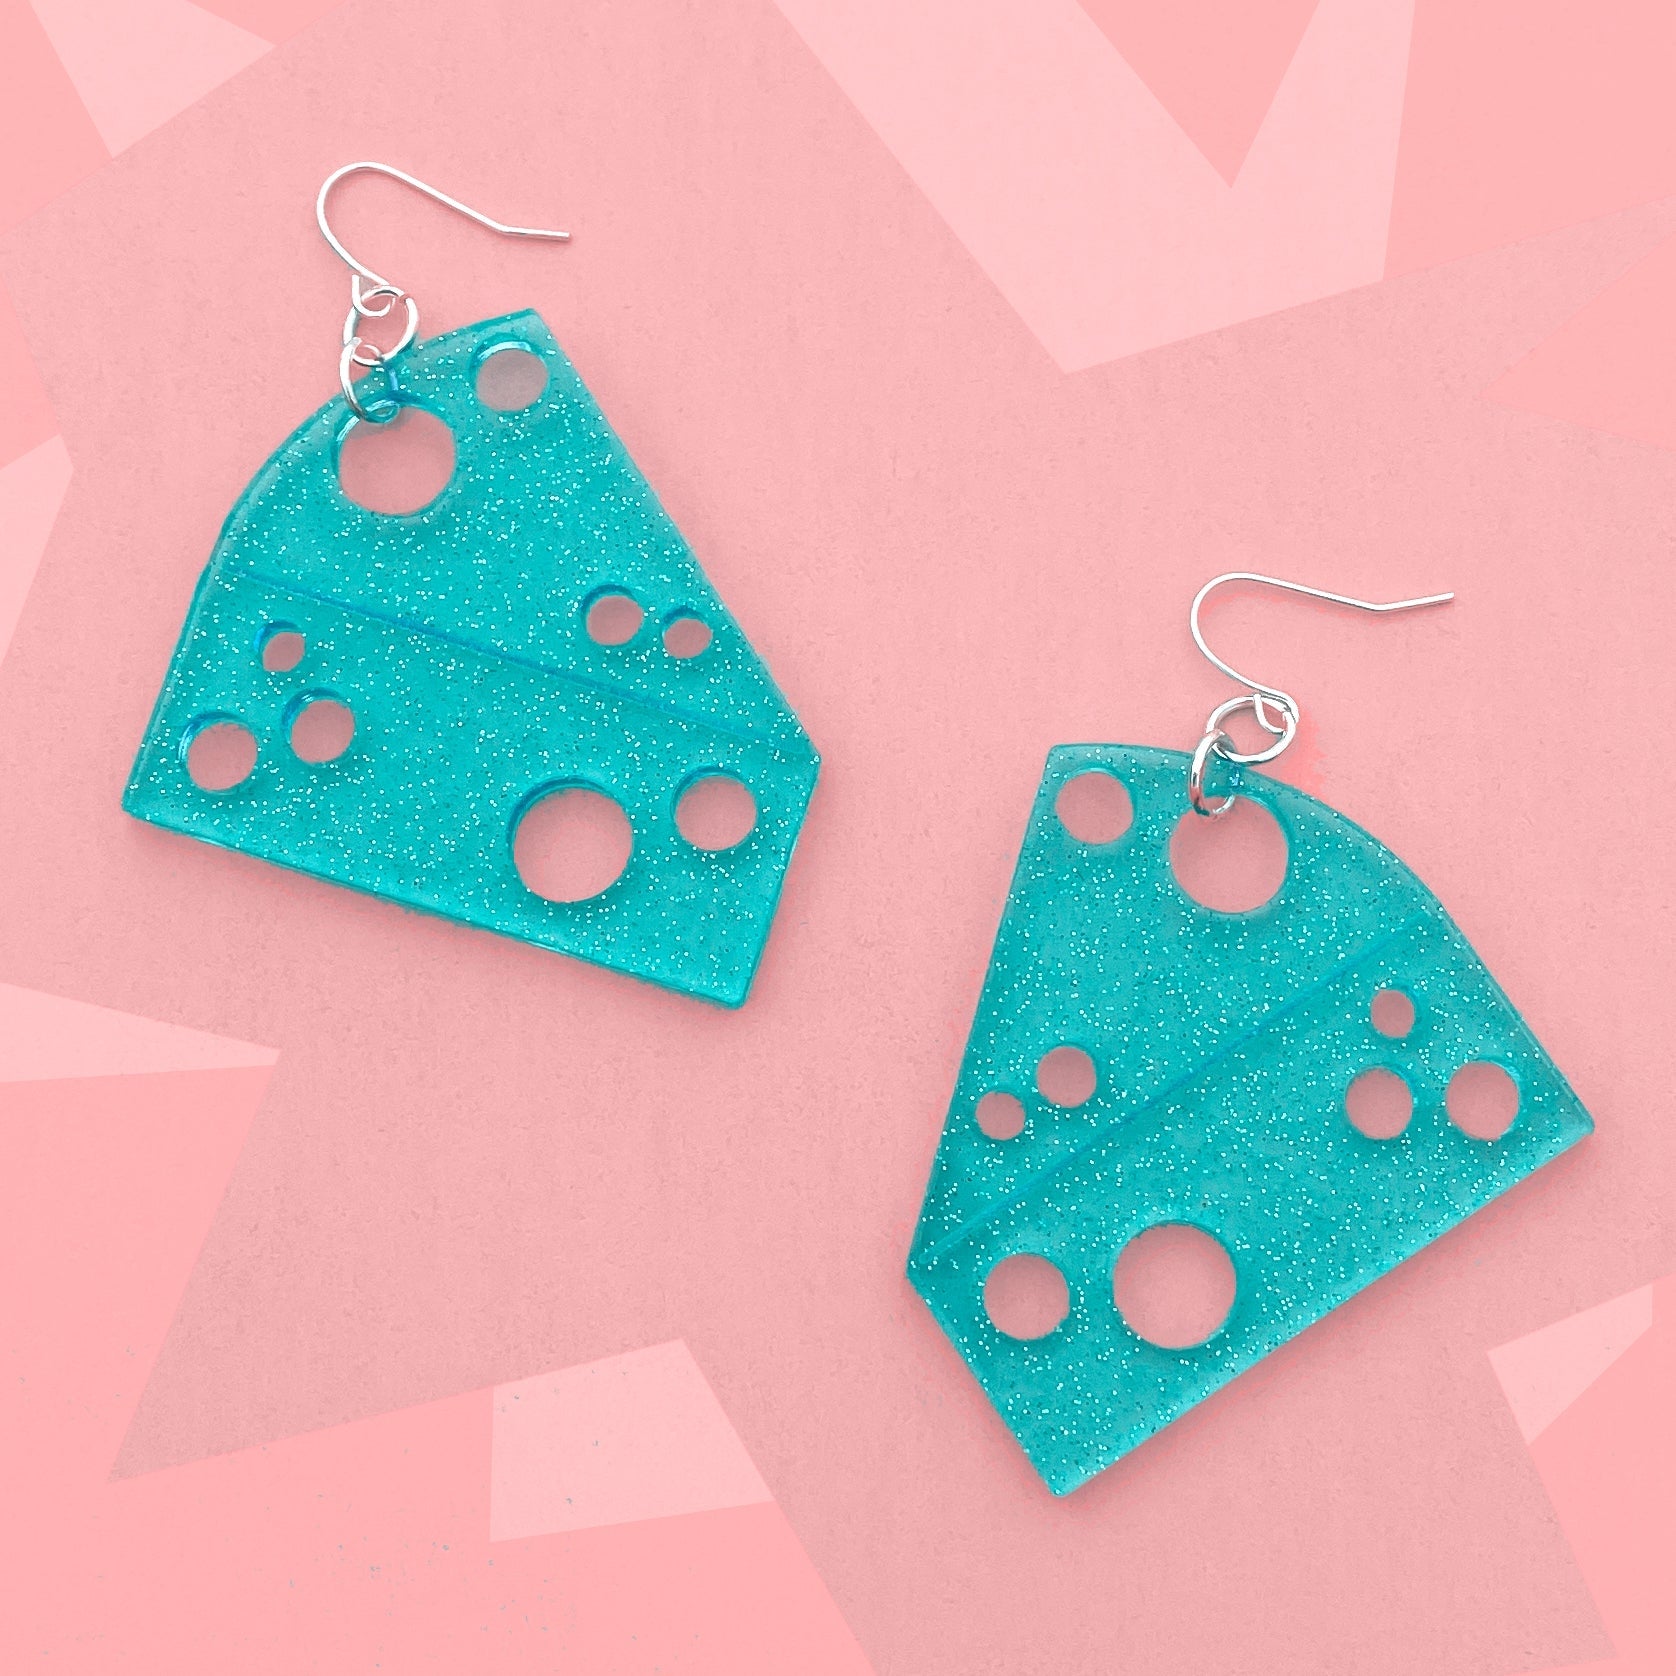 Dangle earrings made of transparent sparkly blue laser-cut acrylic in the shape of two pieces of cheese, full of holes. On a bright pink background 